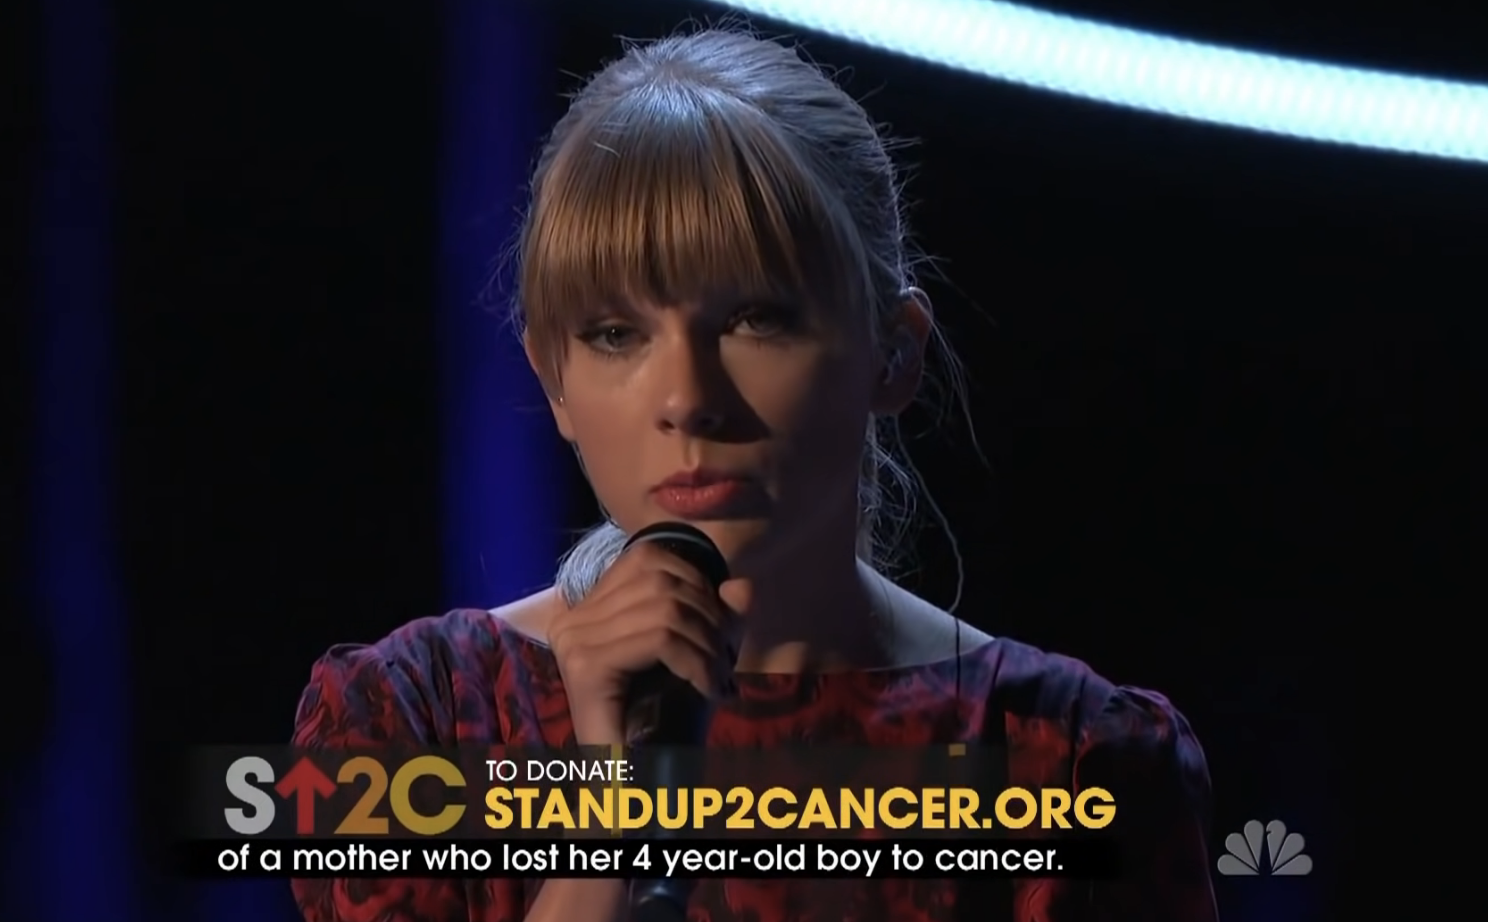 Woman on stage holding microphone with &quot;StandUp2Cancer.org&quot; text and donation information on screen